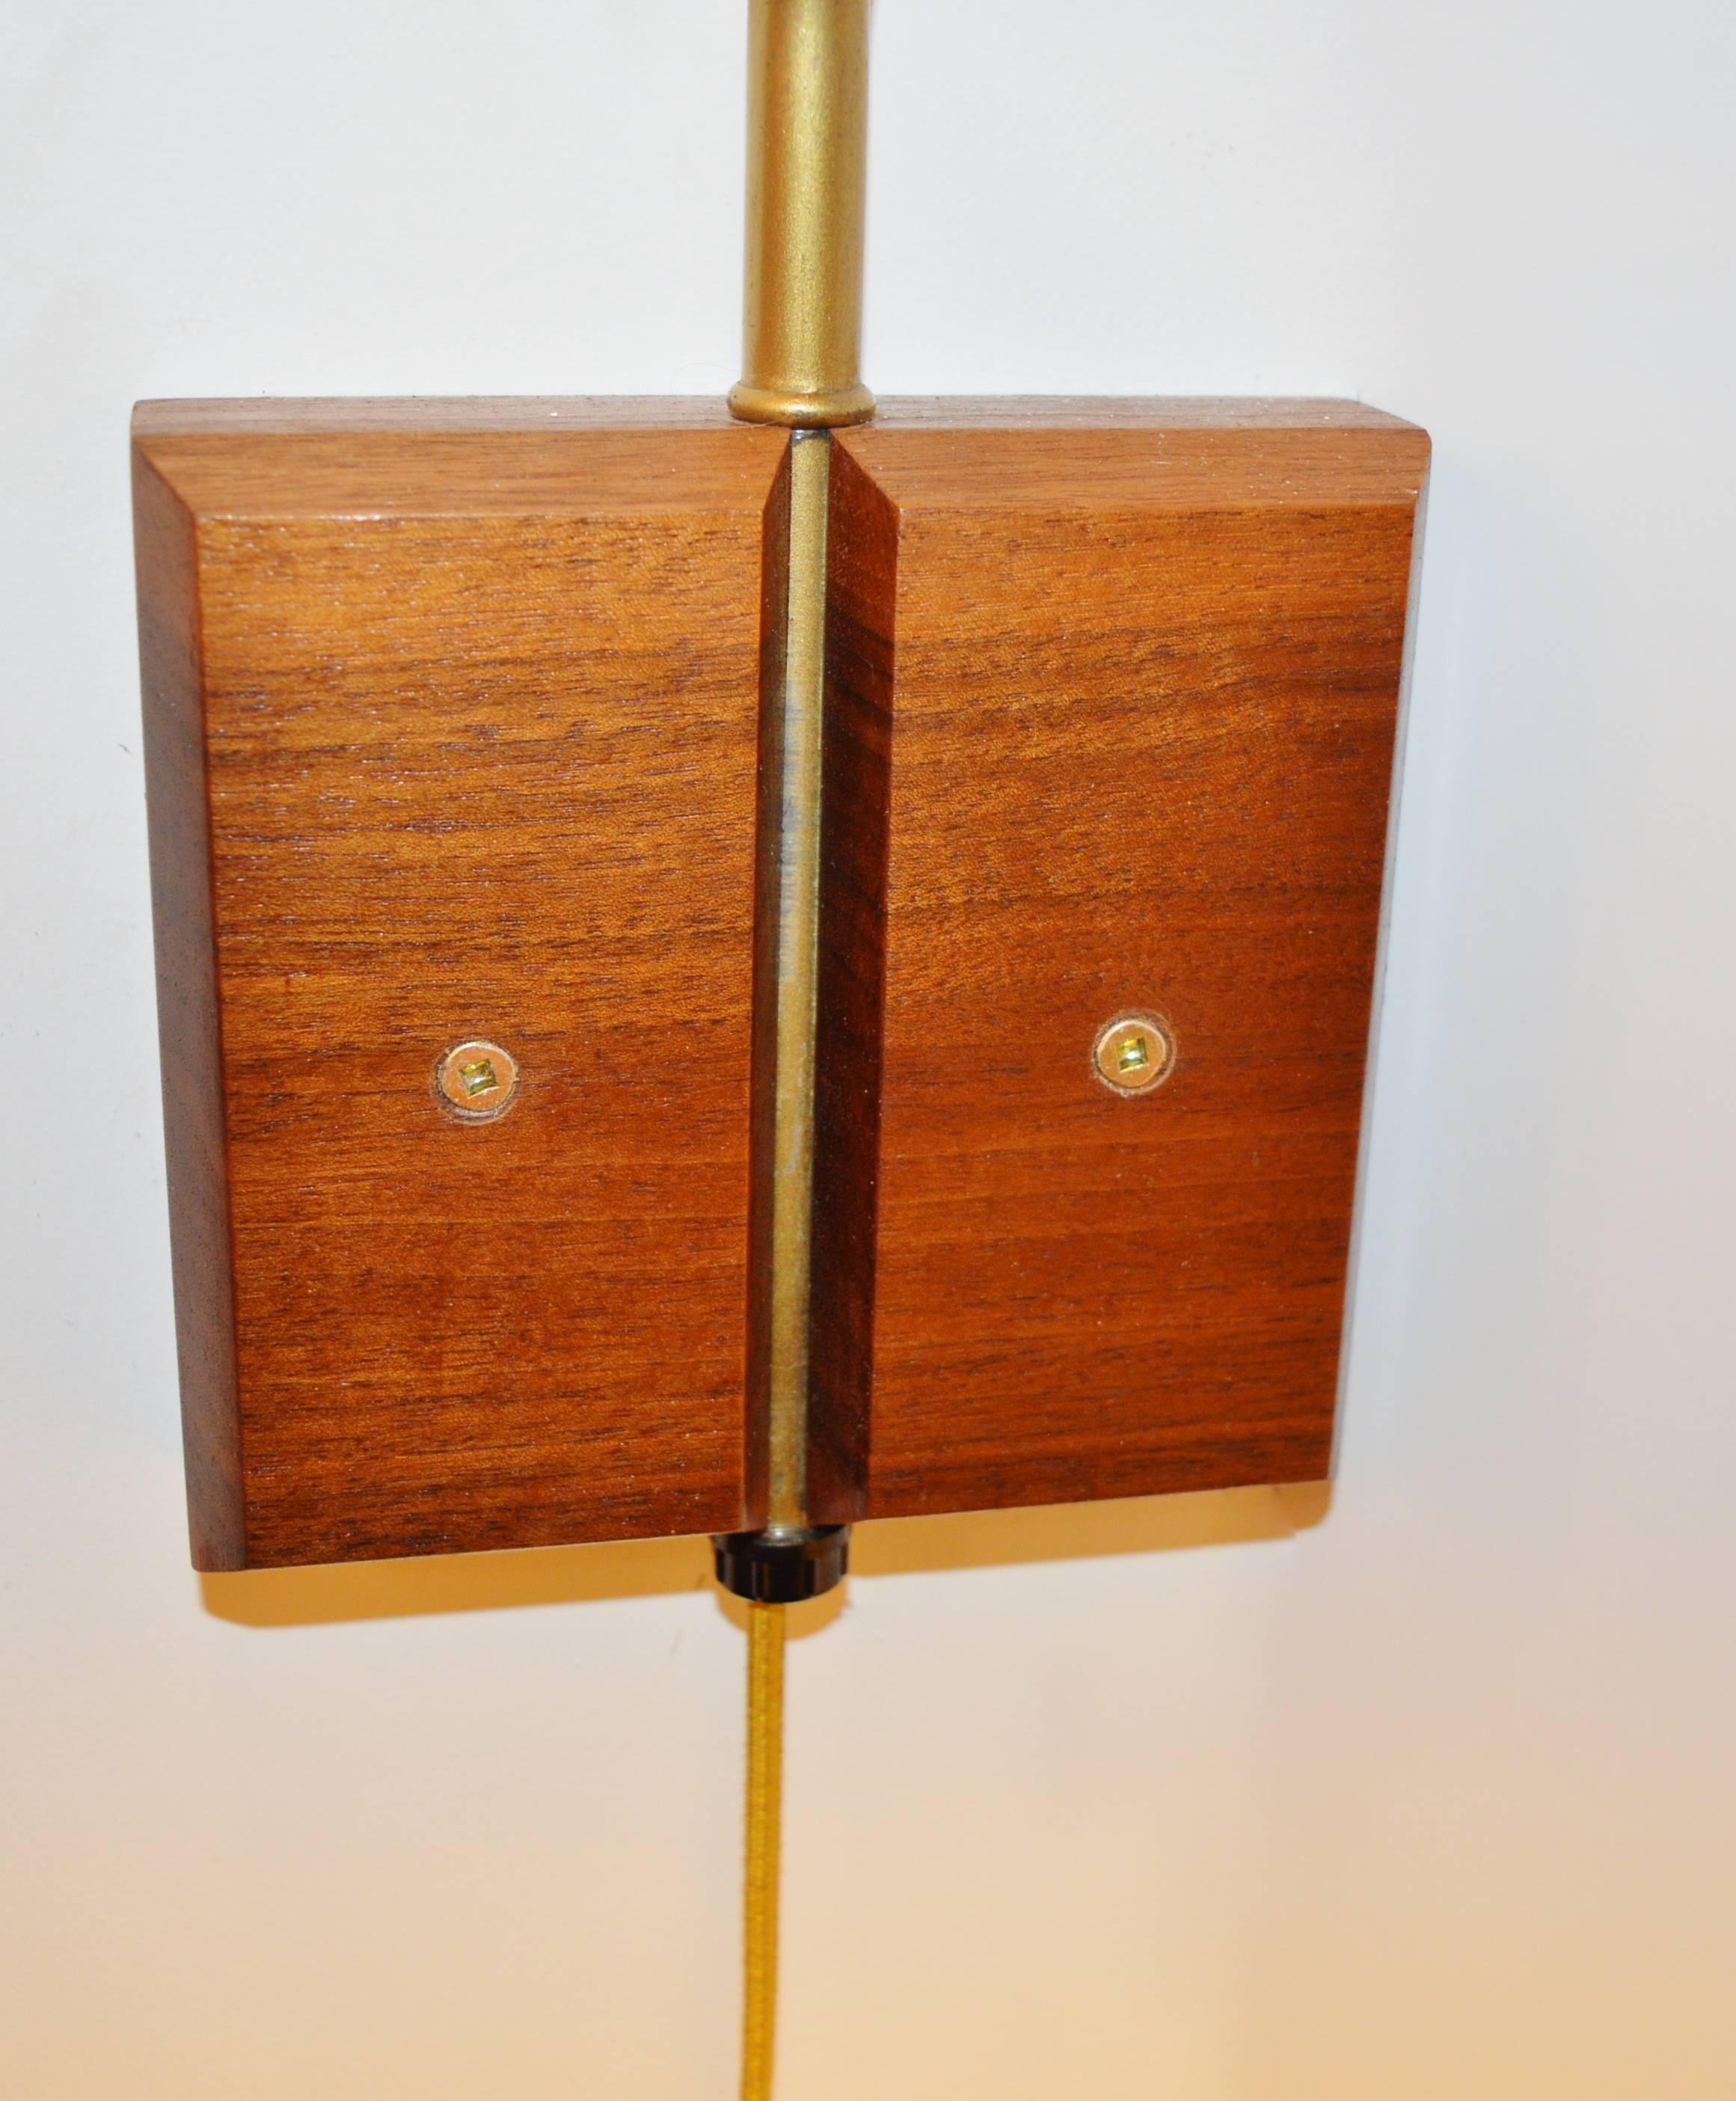 Scandinavian Teak Wall Mount Lamp with Brass and Fiberglass Pendant In Excellent Condition For Sale In New Westminster, British Columbia